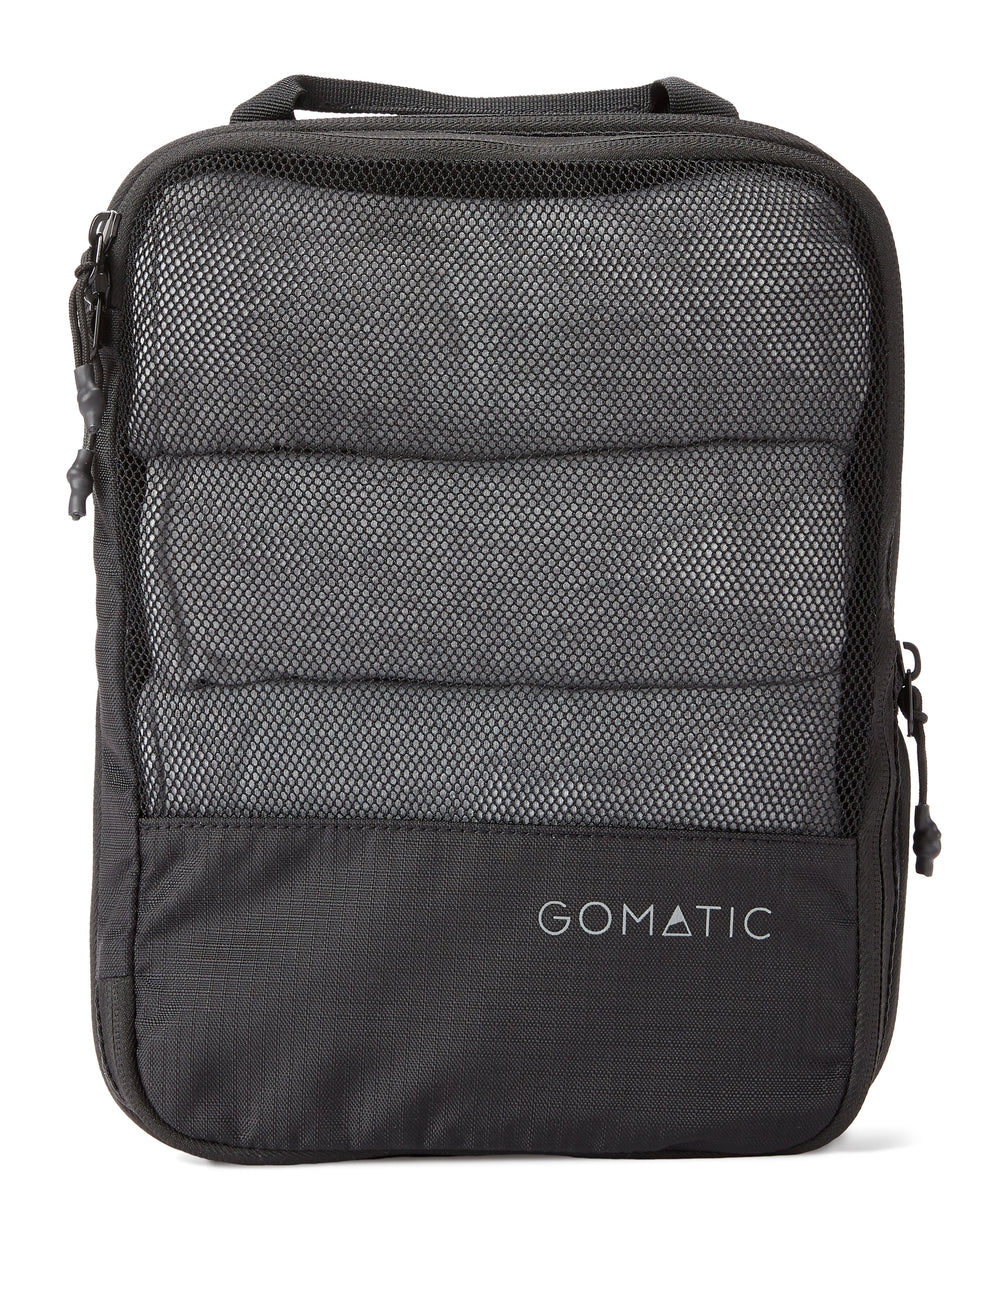 Compression Packing Cubes - GOMATIC Travel Bags and Packs